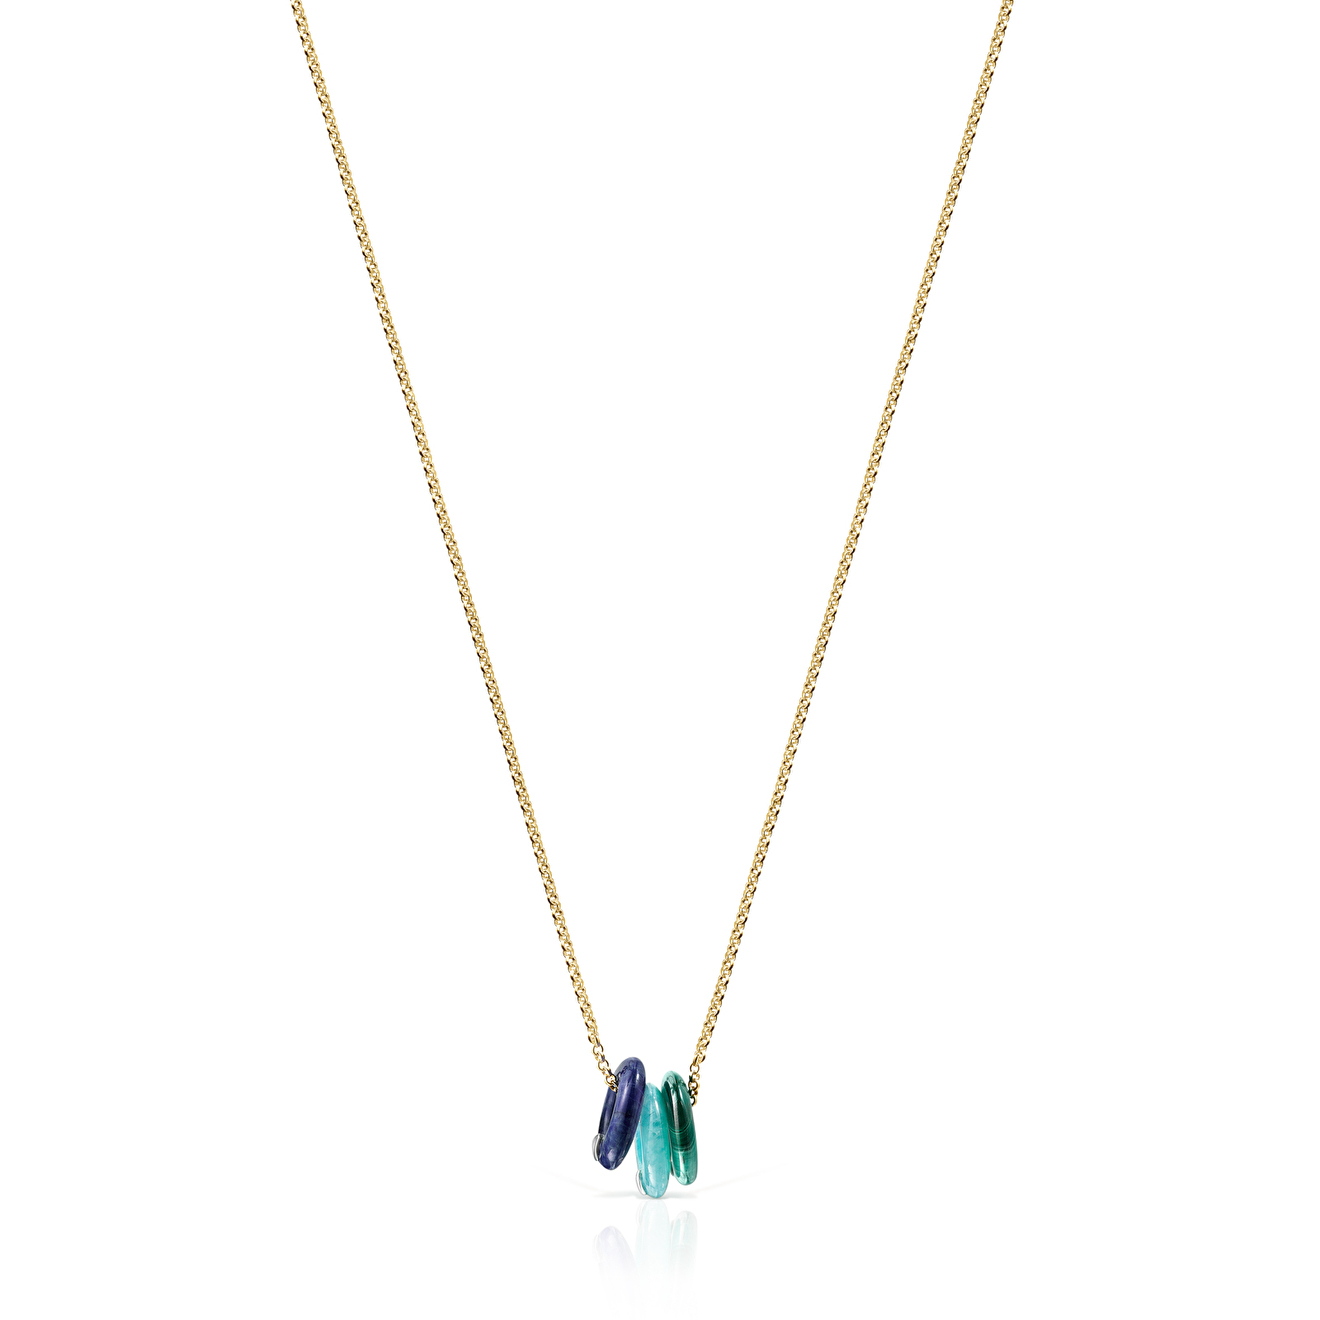 Hold Gems necklace made of silver with vermeil coating with removable  pendants made of malachite, amazonite and lapis lazuli – buy at Poison Drop  online store, SKU